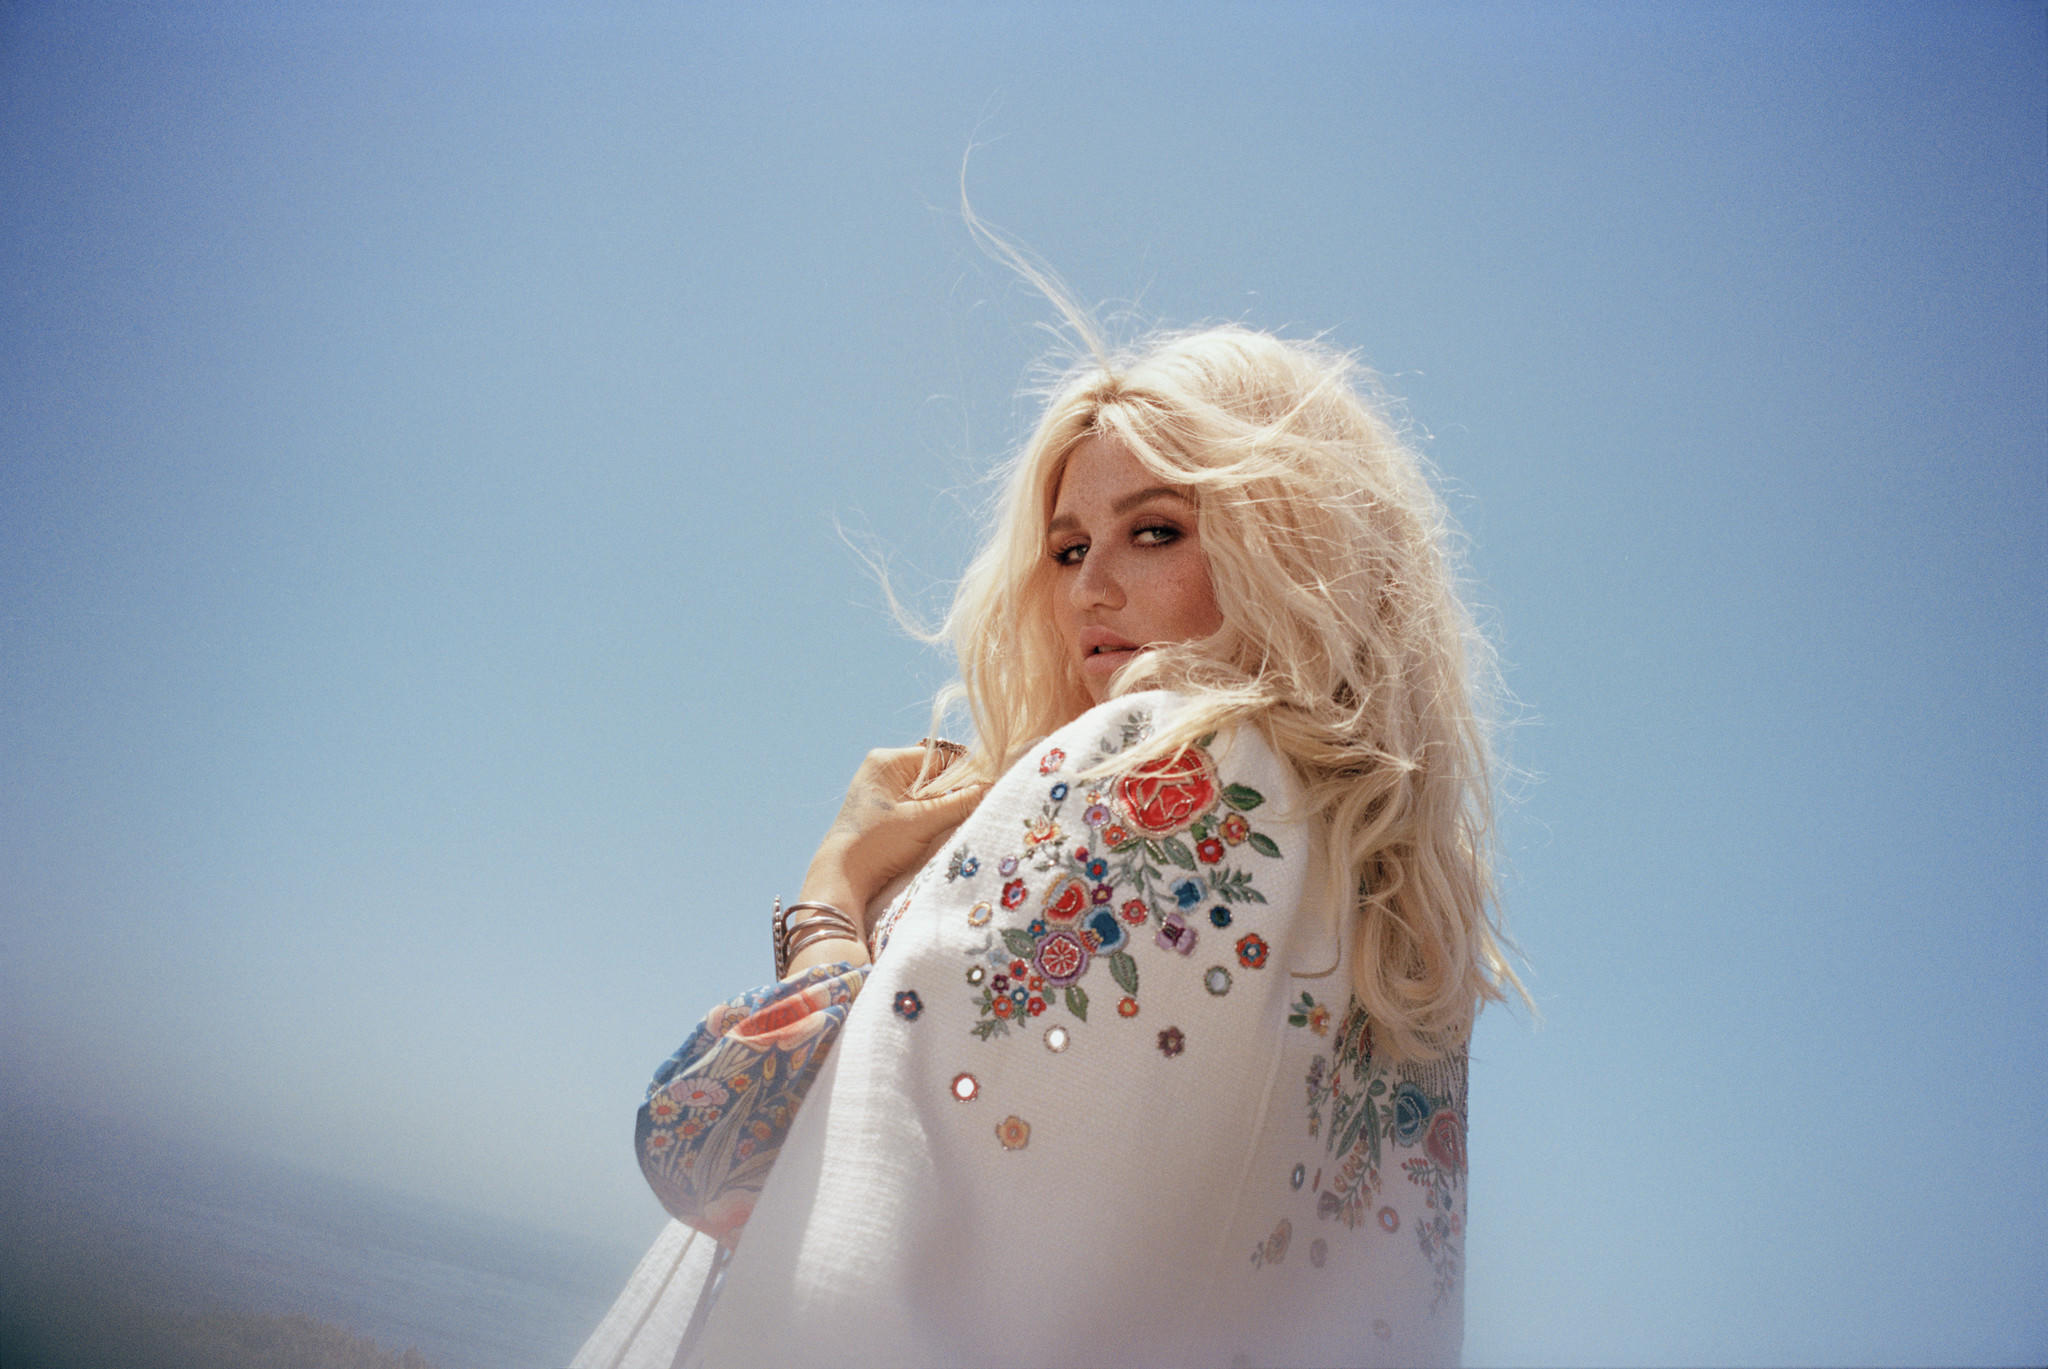 Another blow for Kesha in her legal battles with Dr. Luke